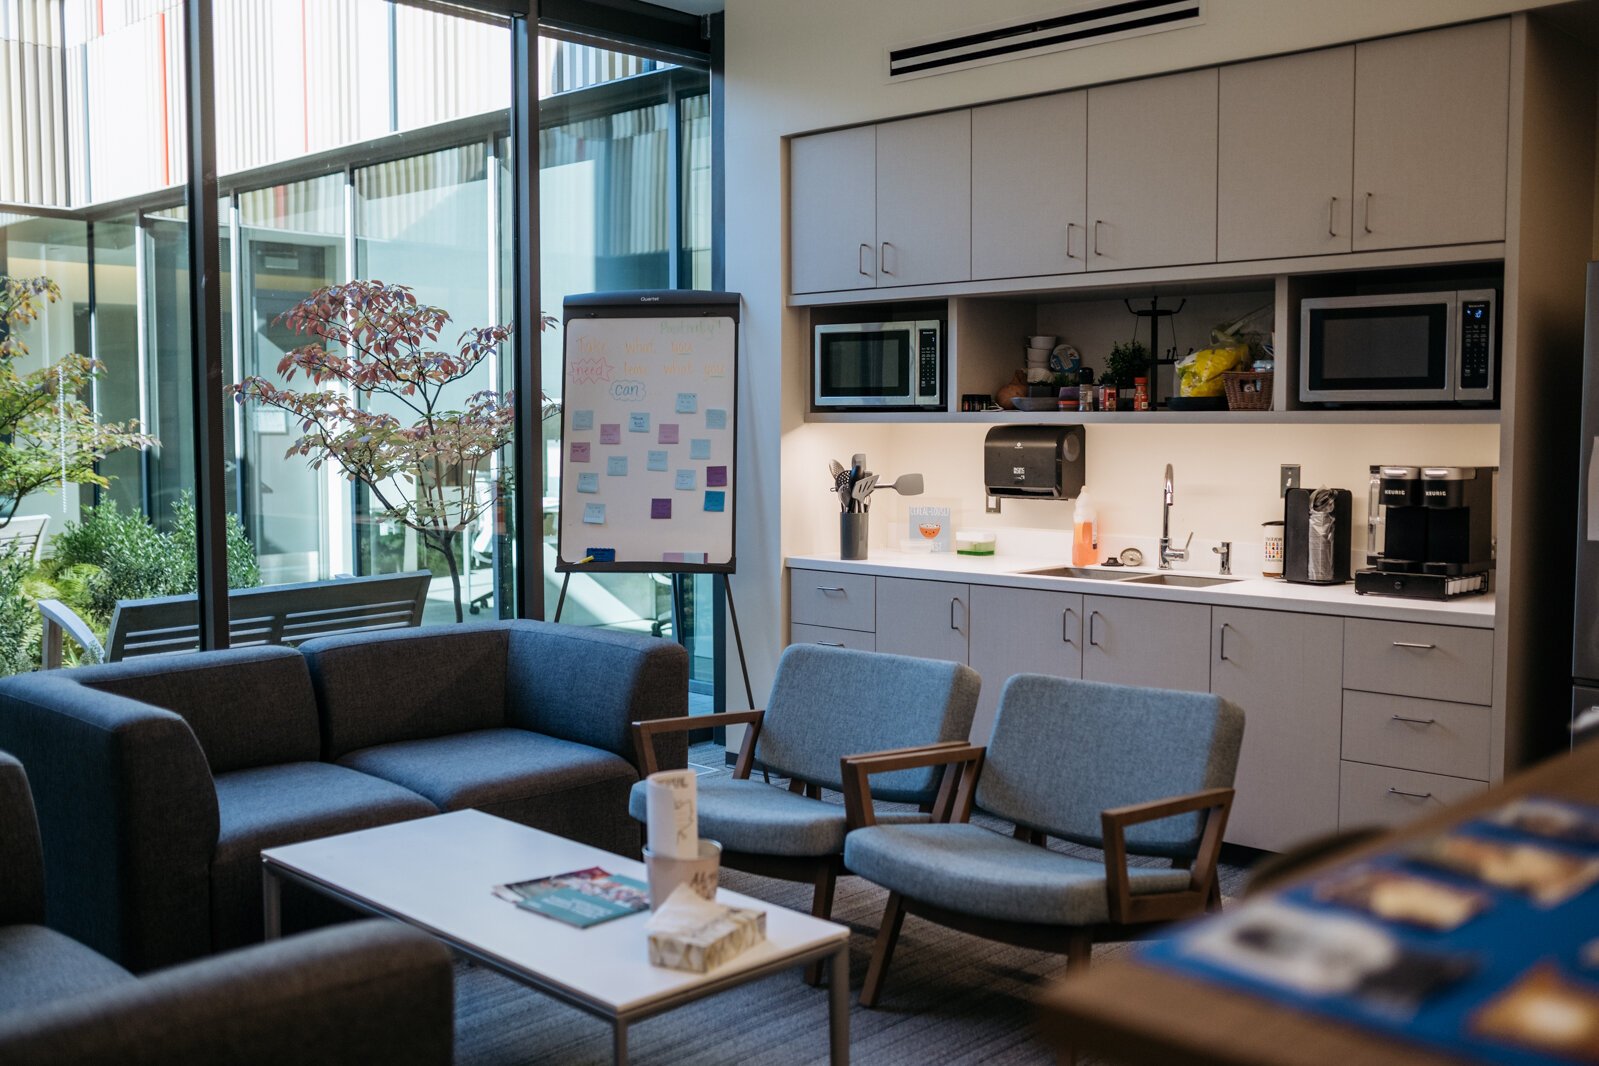 The staff wellness lounge sports healthy snacks, coffee, yoga on TV, and space for eating, relaxing, or finishing a project. The adjacent atrium encourages teachers to rest in sunshine and nature.